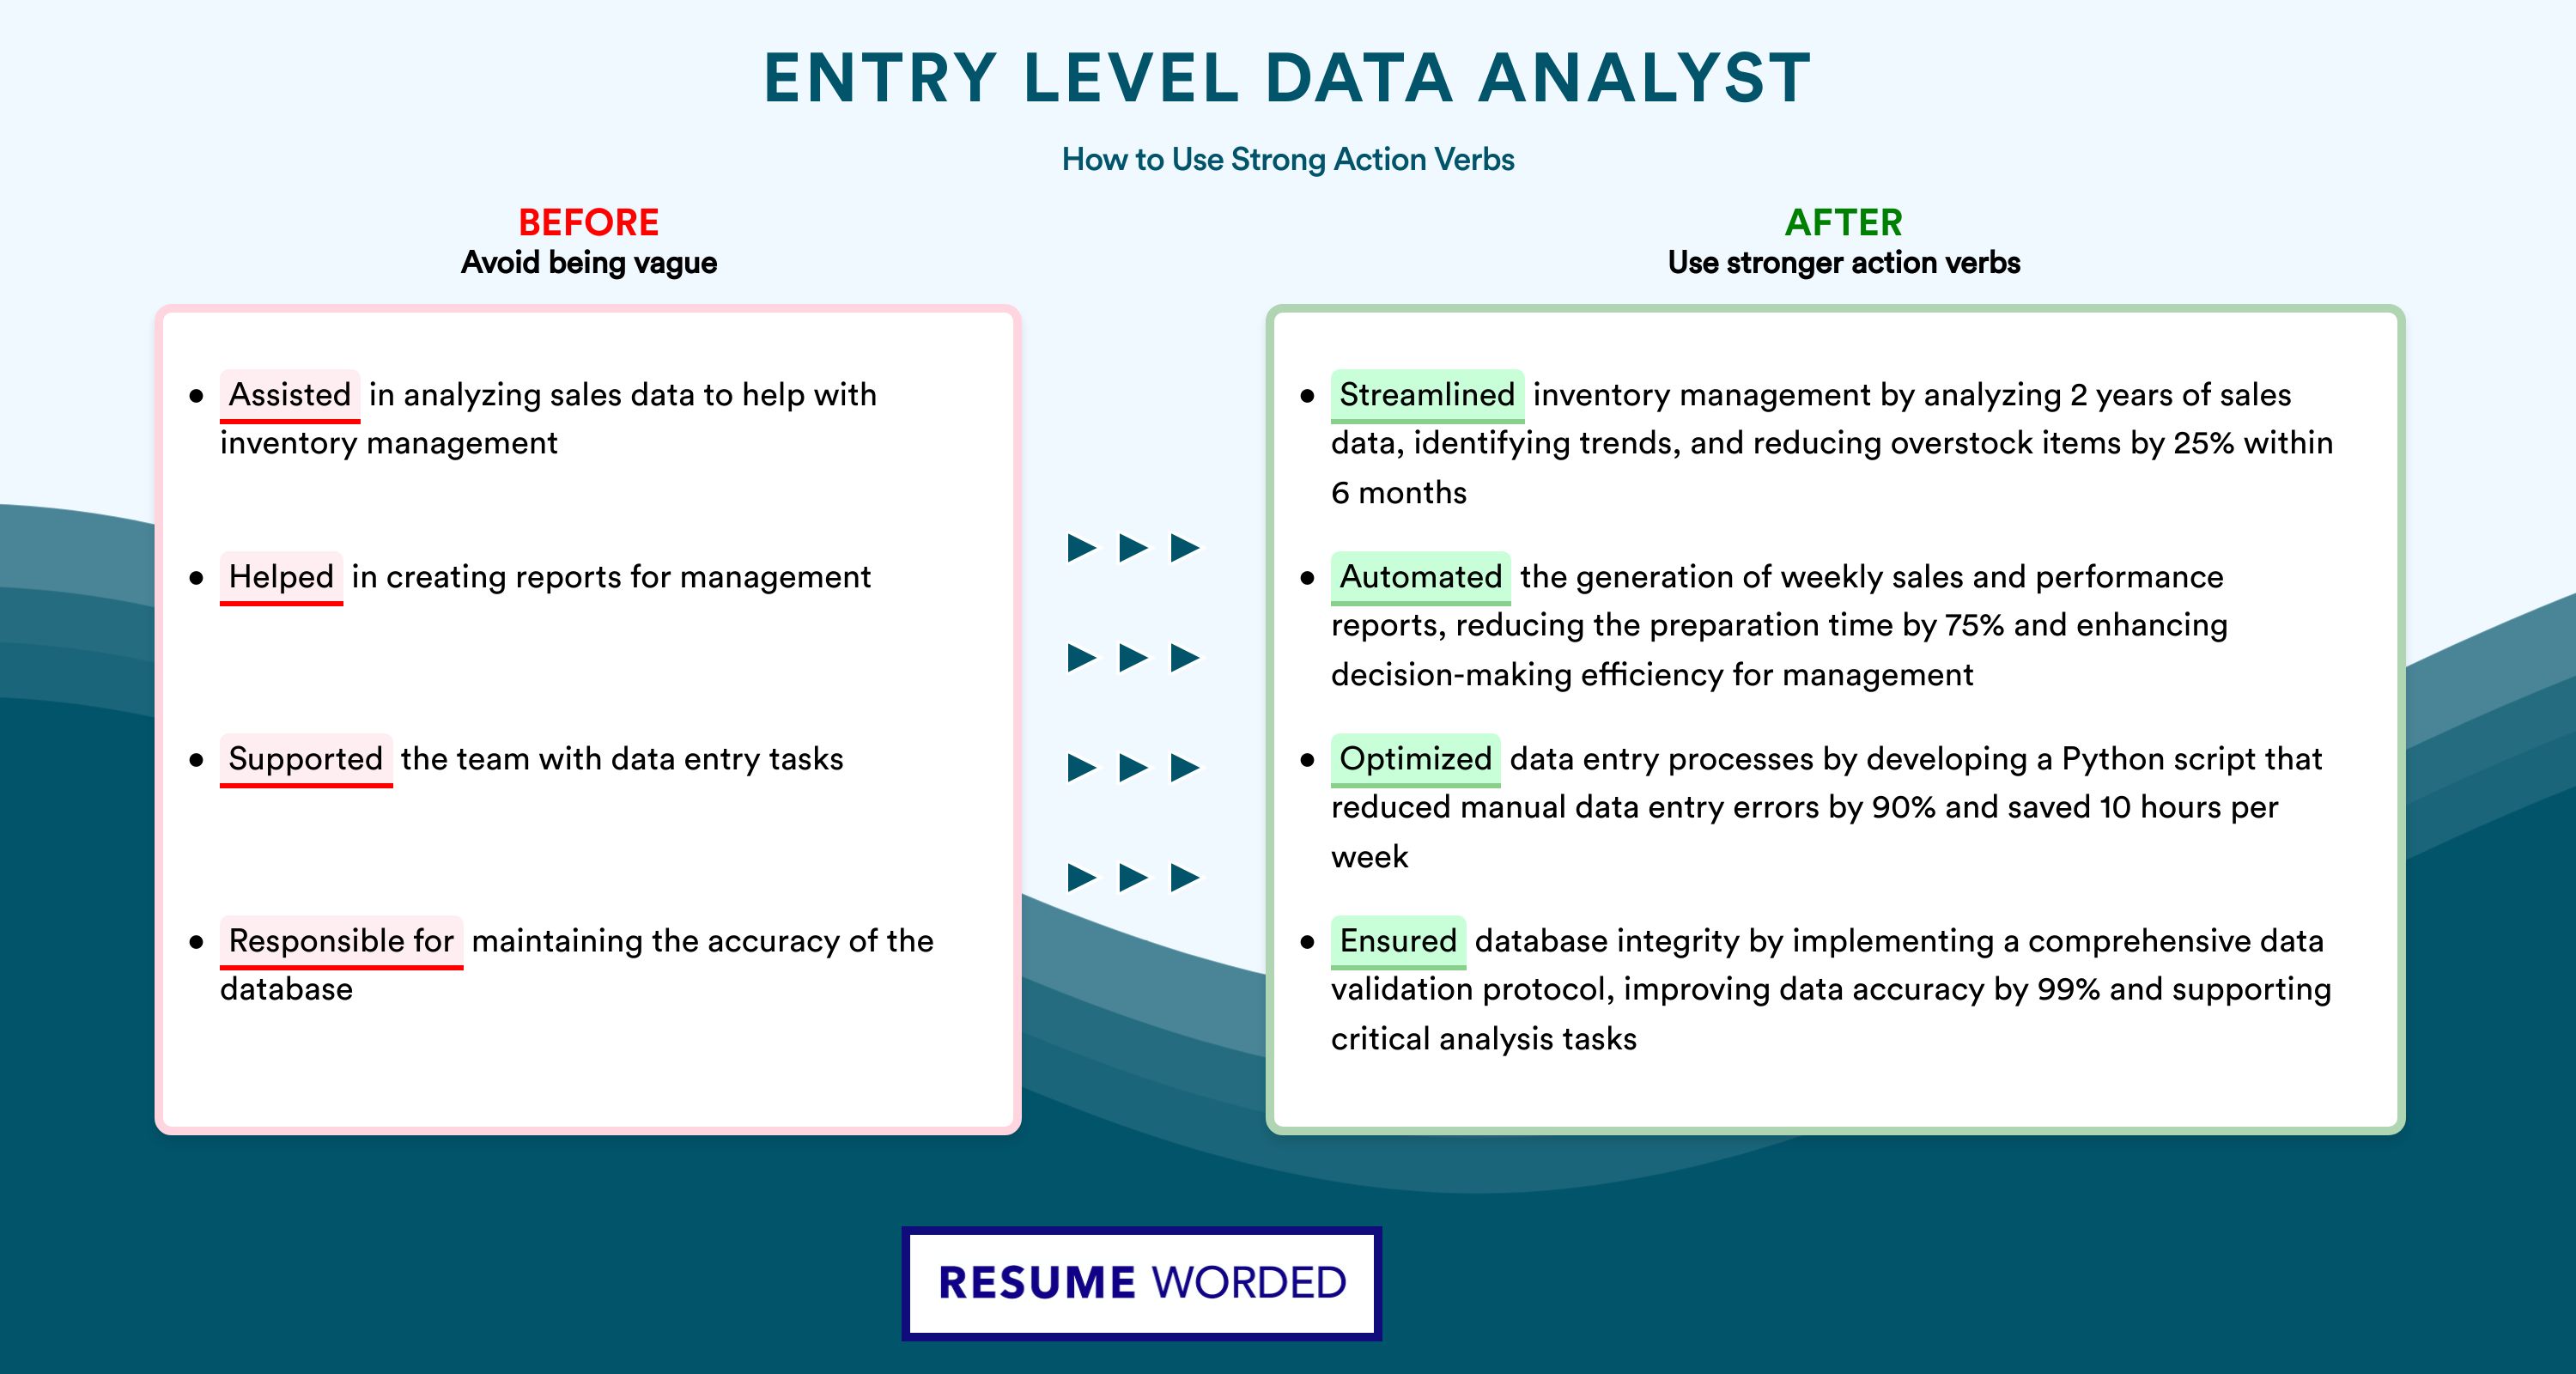 Action Verbs for Entry Level Data Analyst